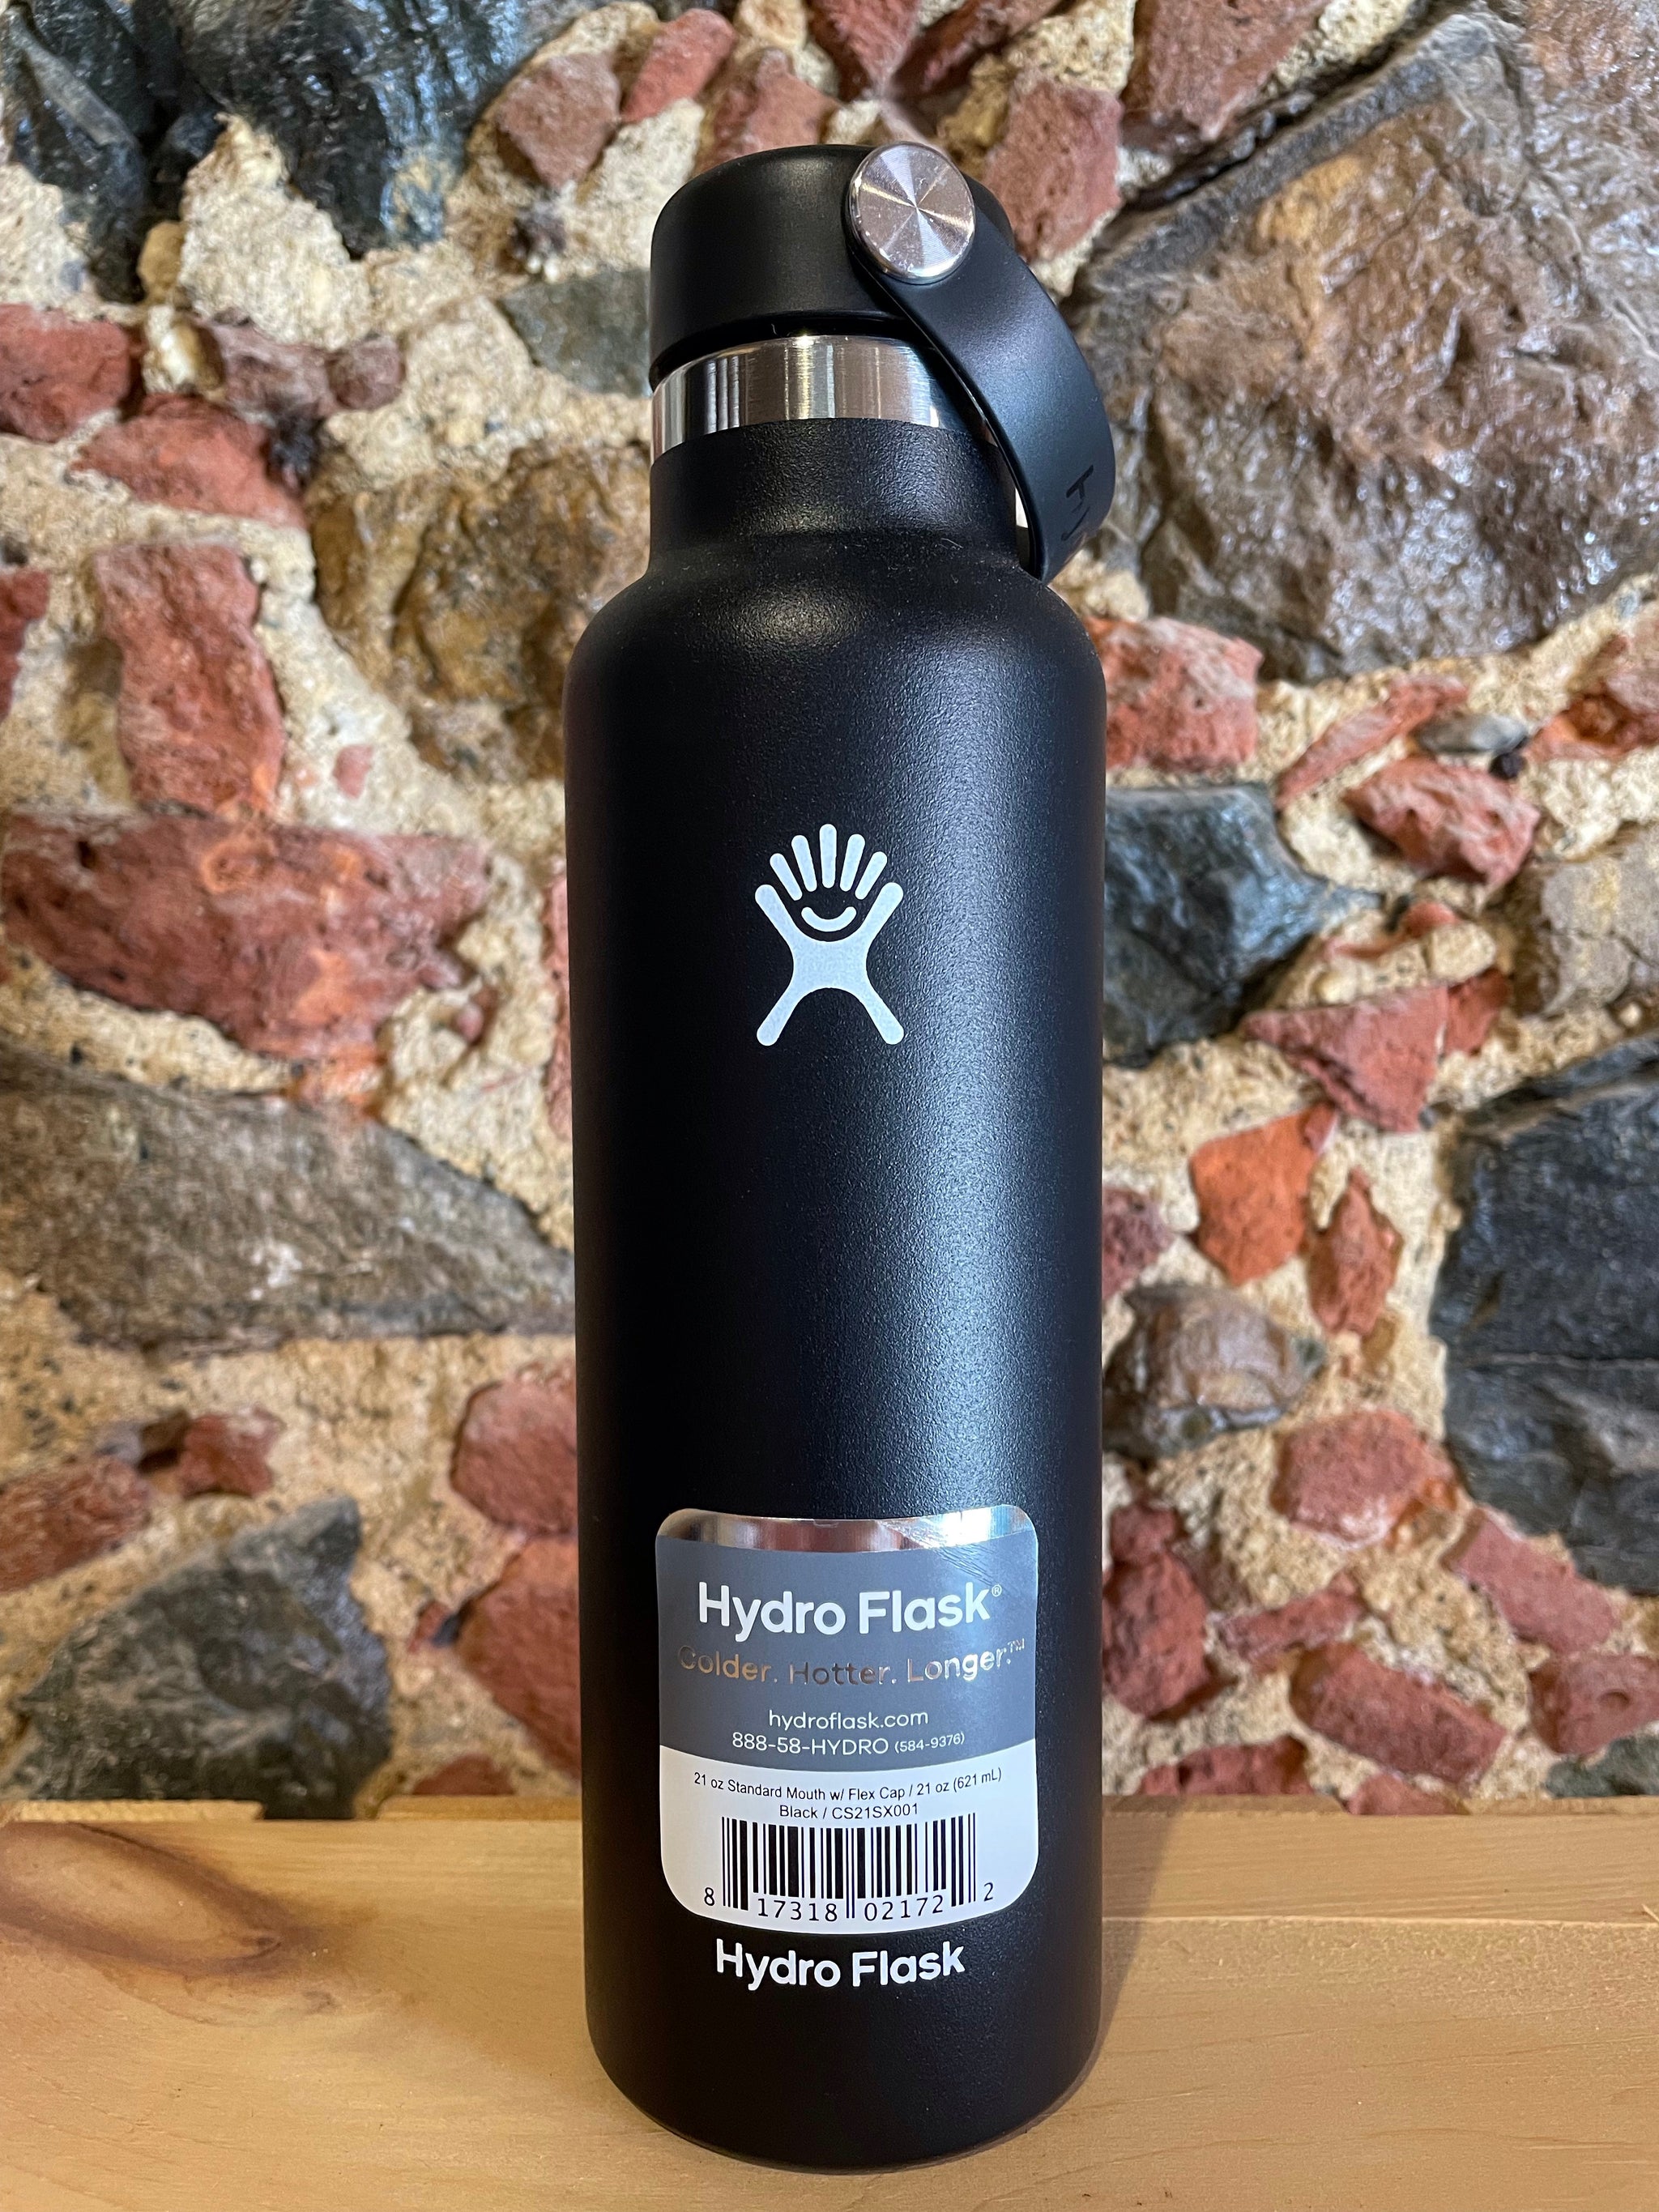  HYDRO FLASK - Water Bottle 621 ml (21 oz) with Flex Straw Cap -  Vacuum Insulated Stainless Steel Reusable Water Bottle - Leakproof Lid -  Hot and Cold Drinks - Standard